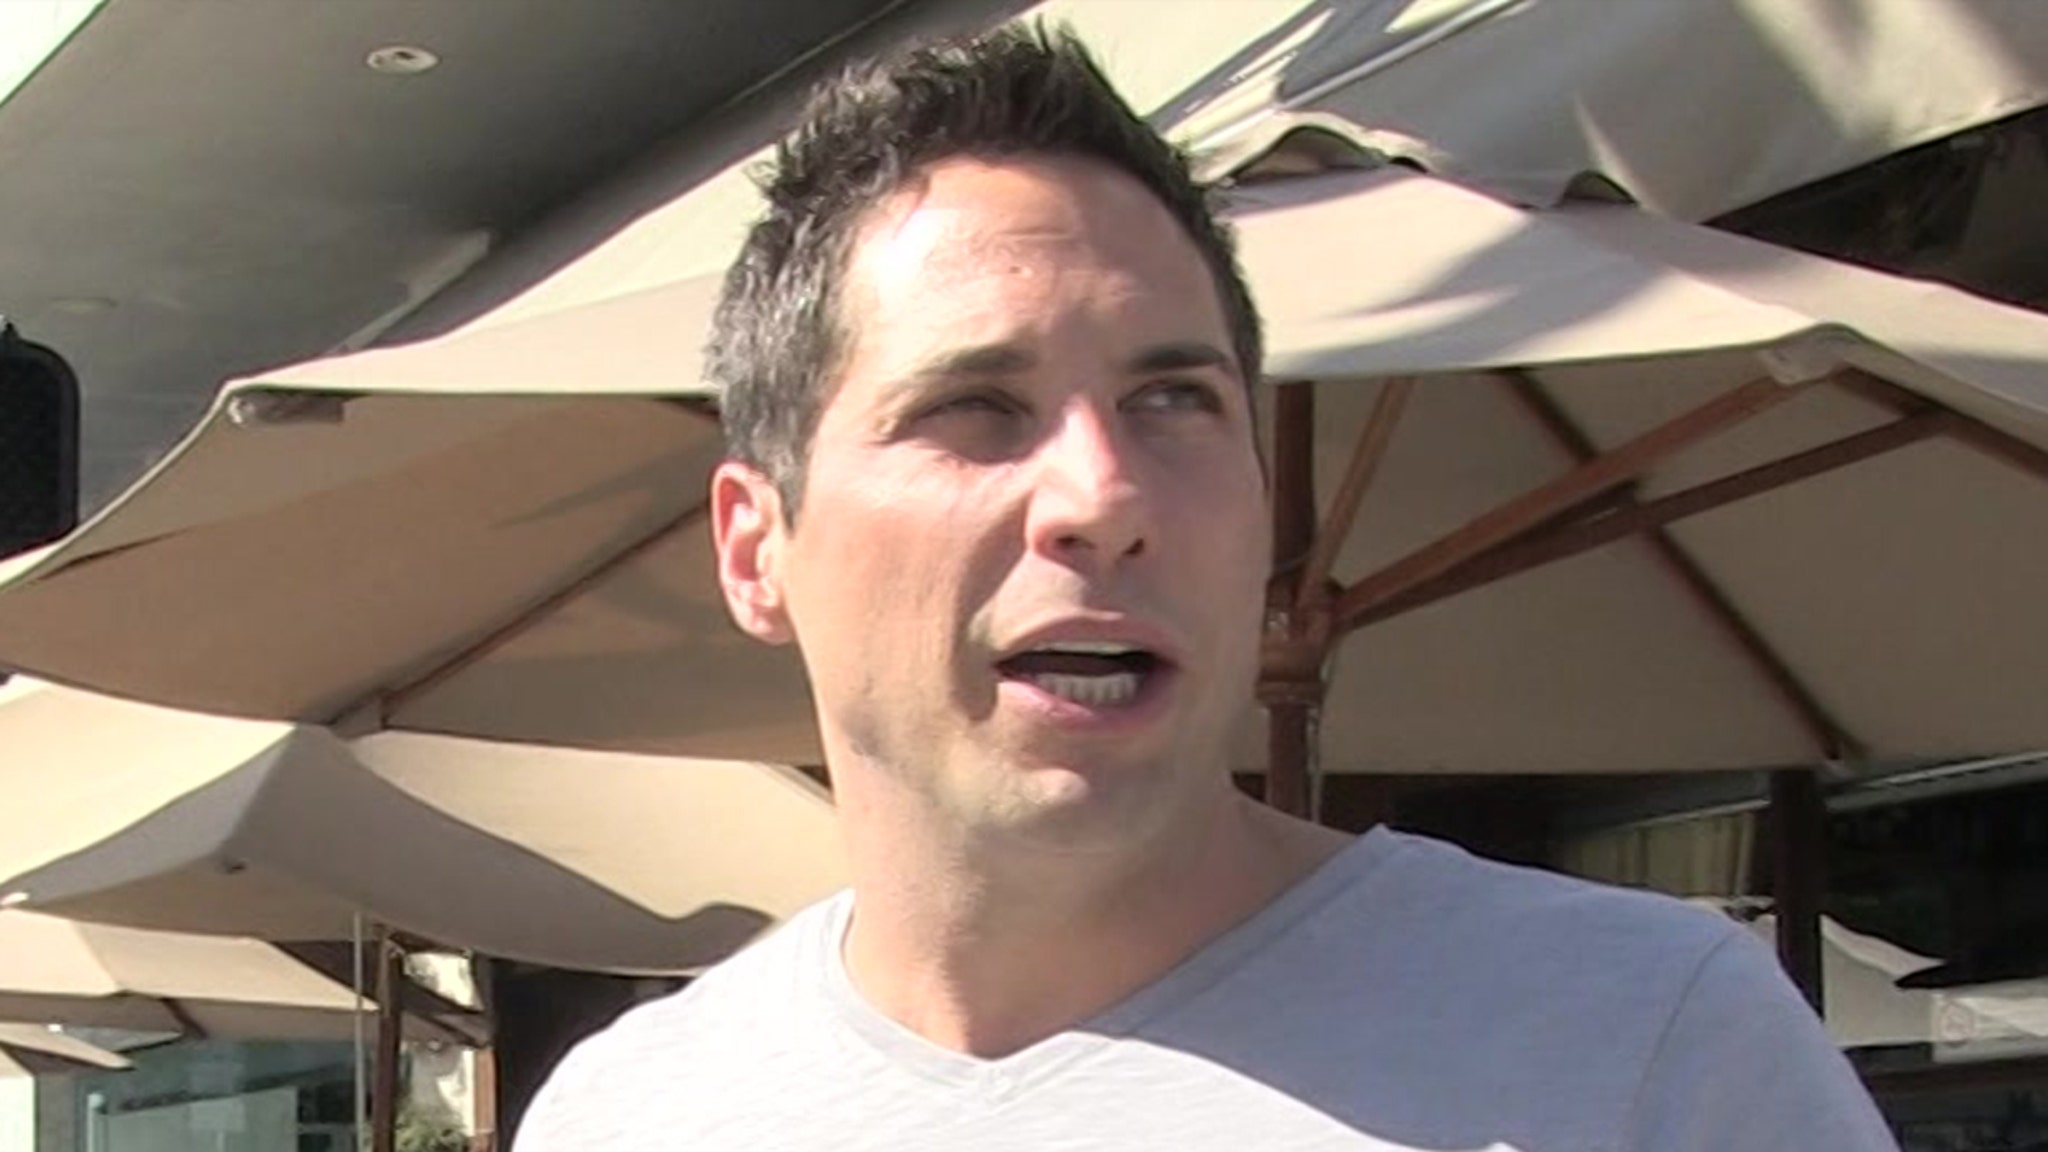 ‘Girls Gone Wild’ Founder Joe Francis Claims Daughters Are Missing, Mom Charged